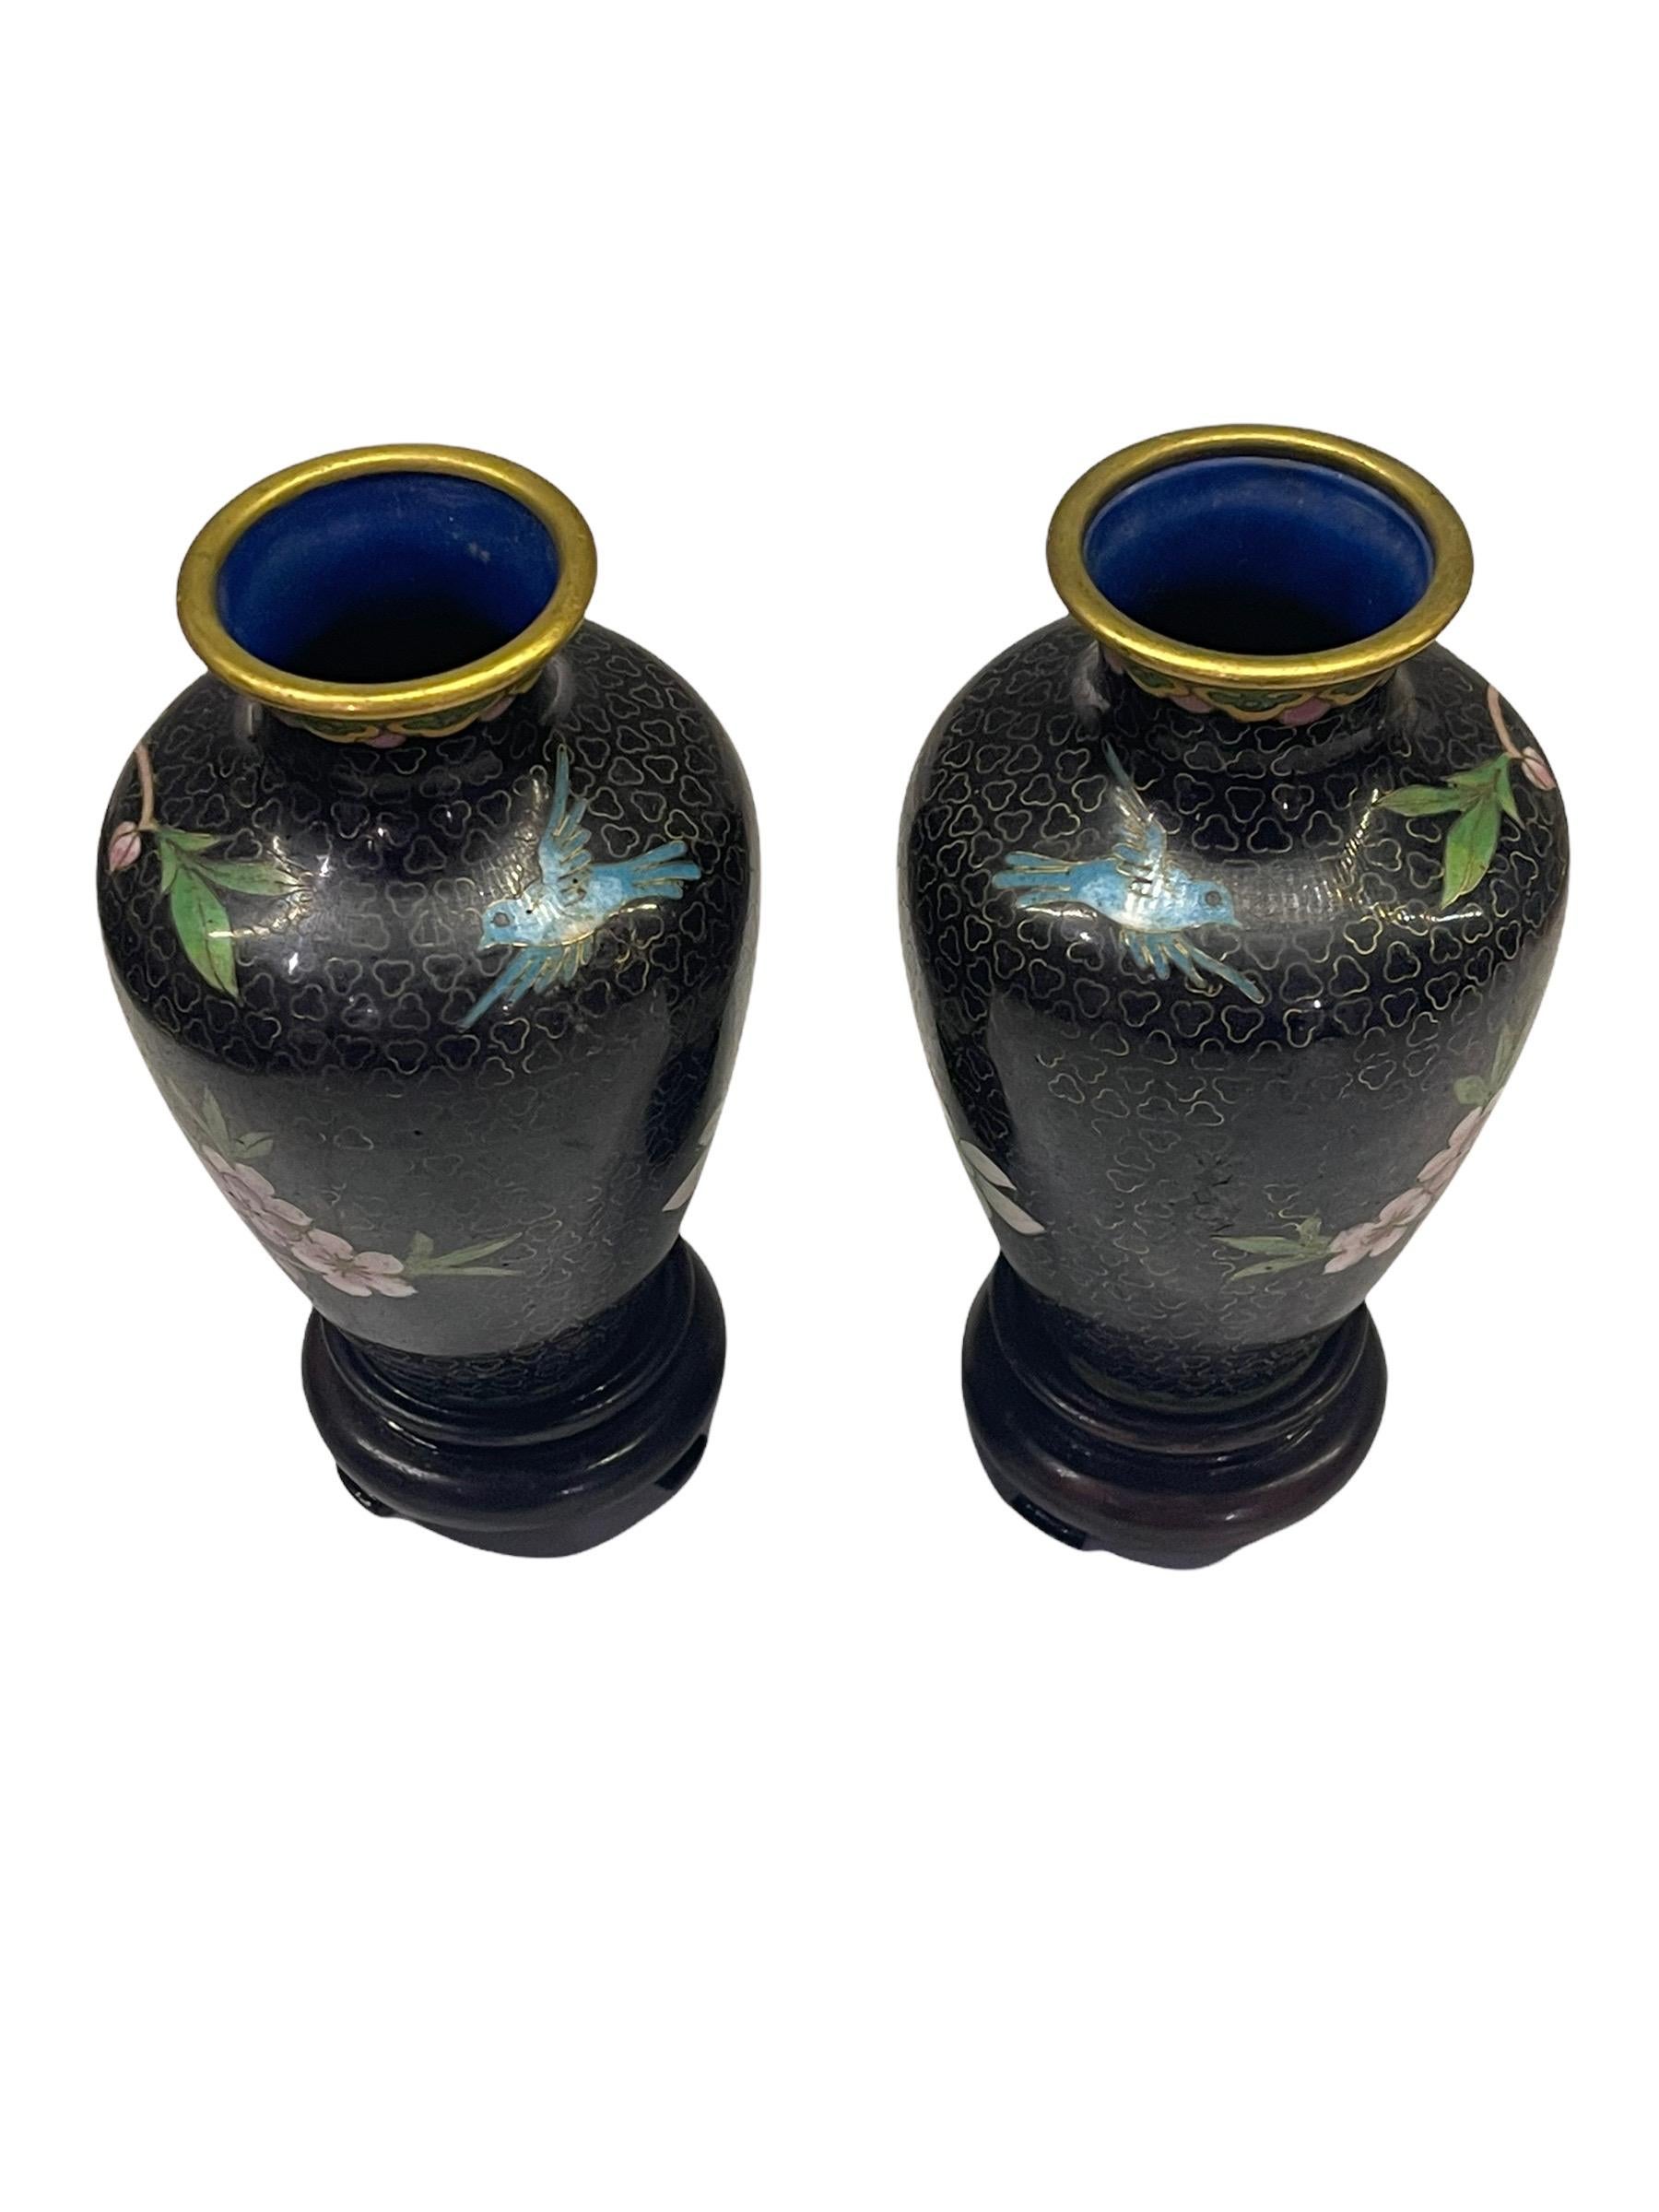 Pair of Early 20th Century 'Republic Period' Chinese Urn Vases In Fair Condition For Sale In North Miami, FL